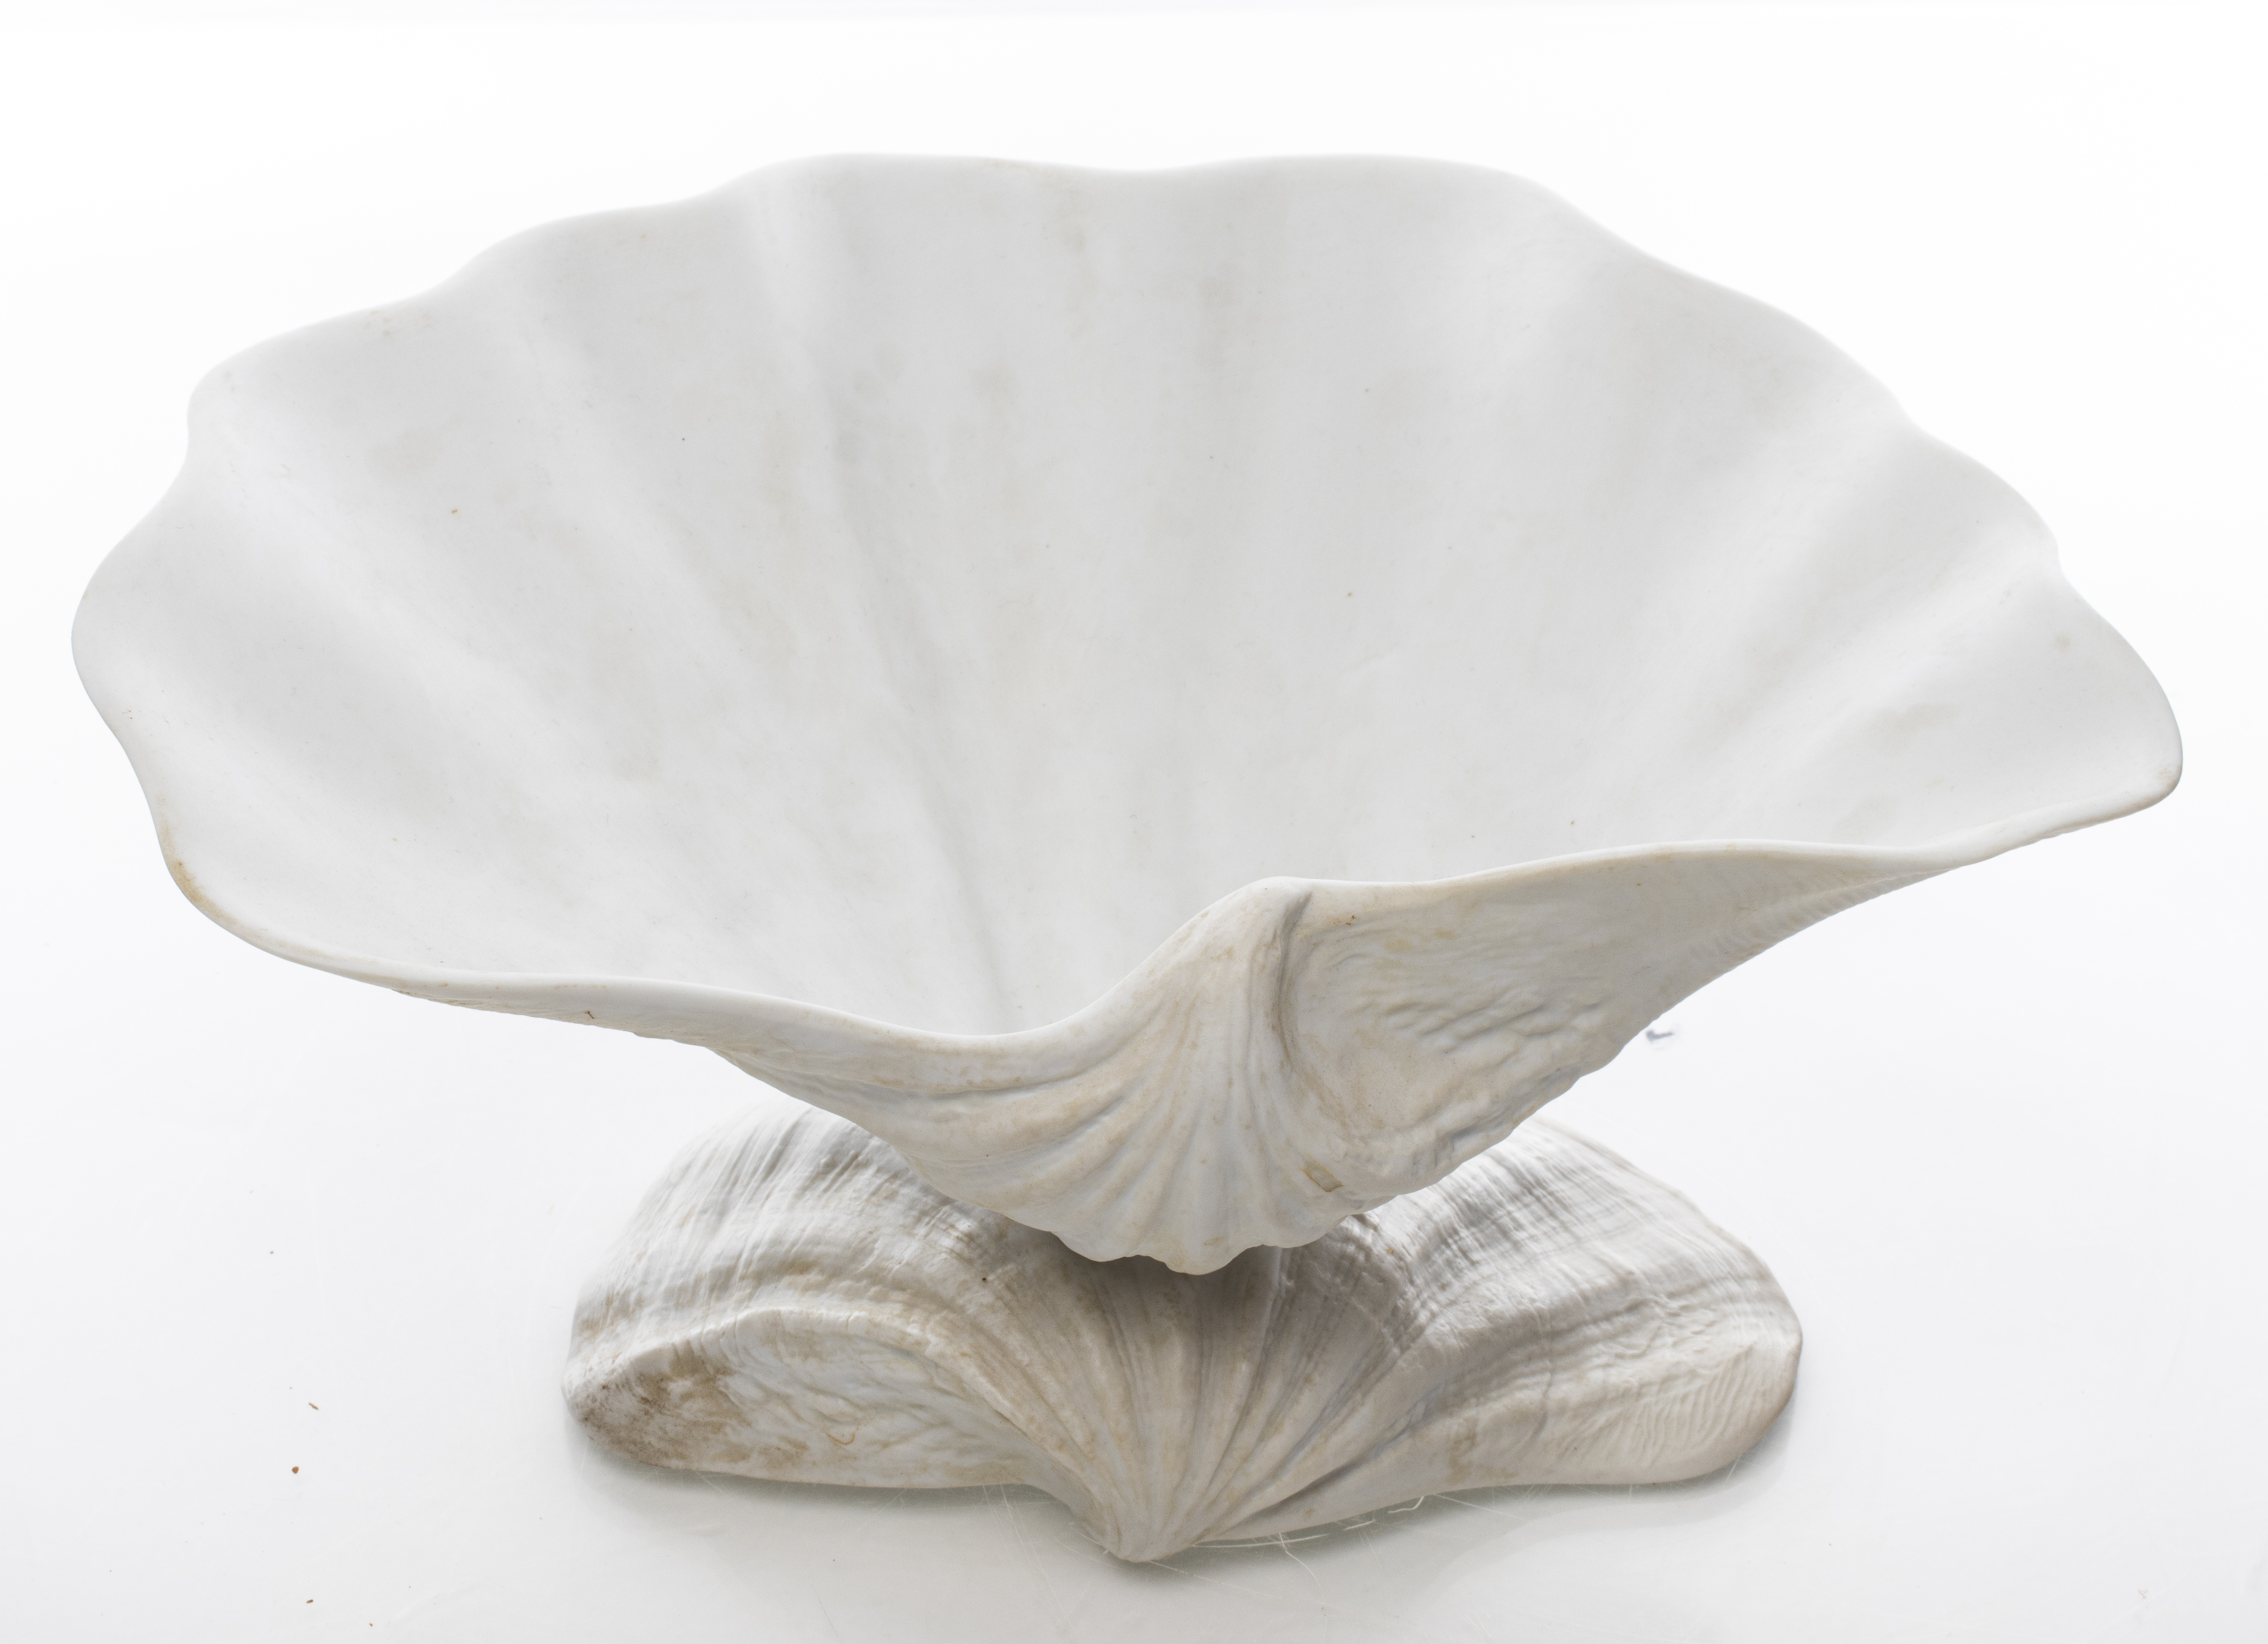 BISQUE CERAMIC DOUBLE CLAM SHELL 3c4f55